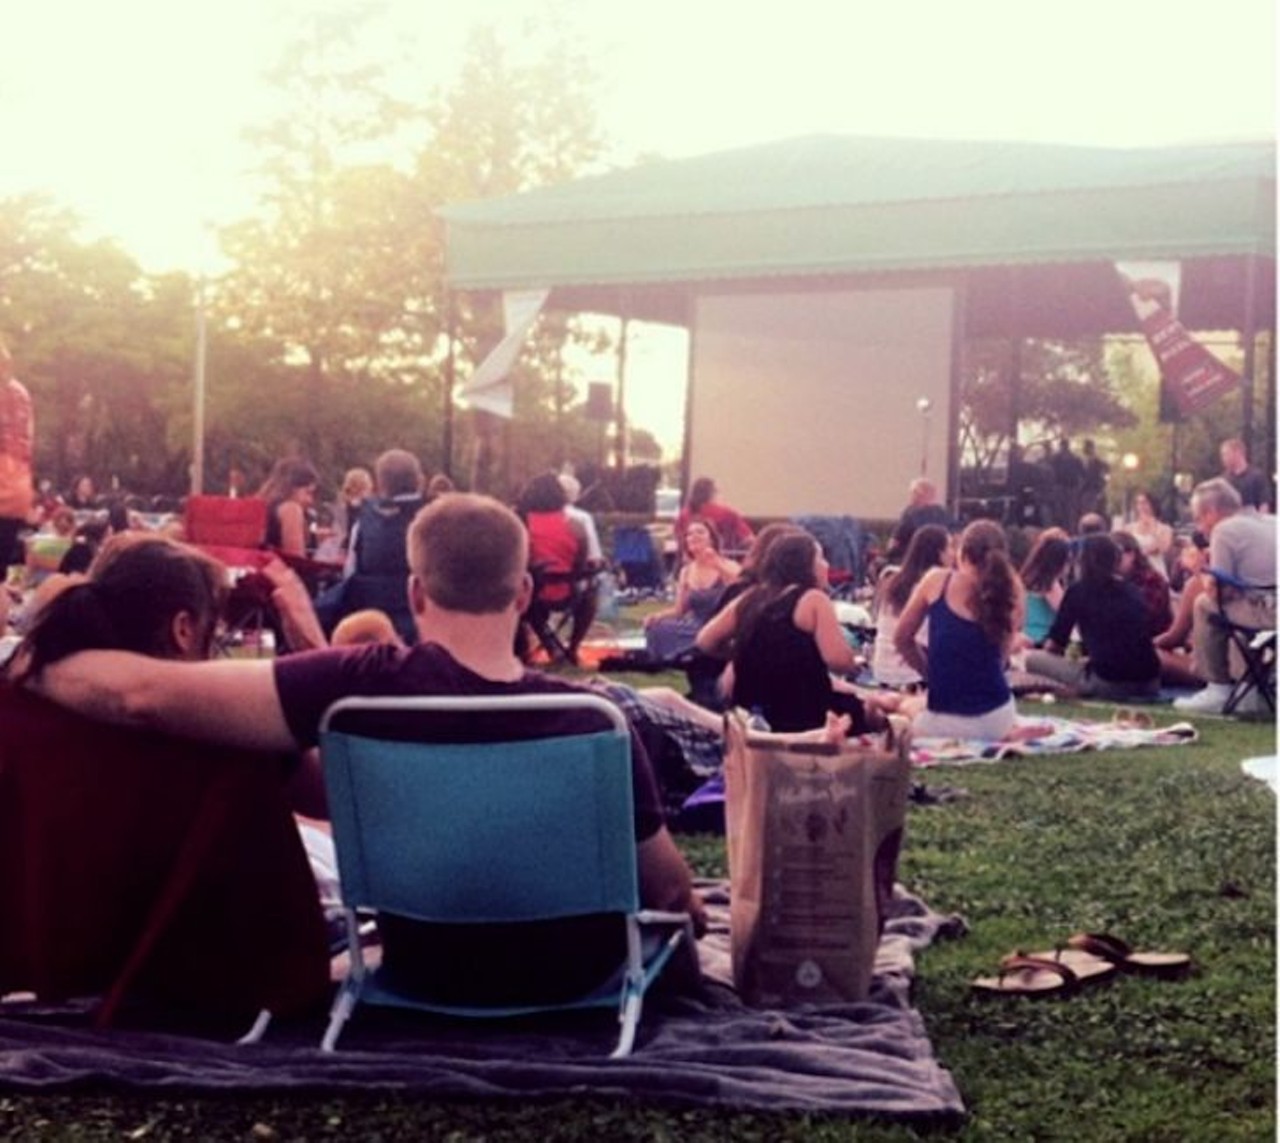 Catch one of the many outdoor movies showing this fall
Get your picnic blankets and lawn chairs ready; it&#146;s outdoor movie season. Catch a first Friday movie at Leu Gardens, where wine, beer and food are permitted (so don&#146;t shy away from packing a full meal), or at Cranes Roost Park&#146;s Sunset Cinema event on select Saturdays, where films are screened on the lawn in front of the Plaza tower. If you opt for one of the free Popcorn Flicks in the Park in Central Park, you&#146;ll want to grab some food to-go at a nearby Park Avenue eatery or bring your own snacks.
Photo via aroundwinterpark/Instagram